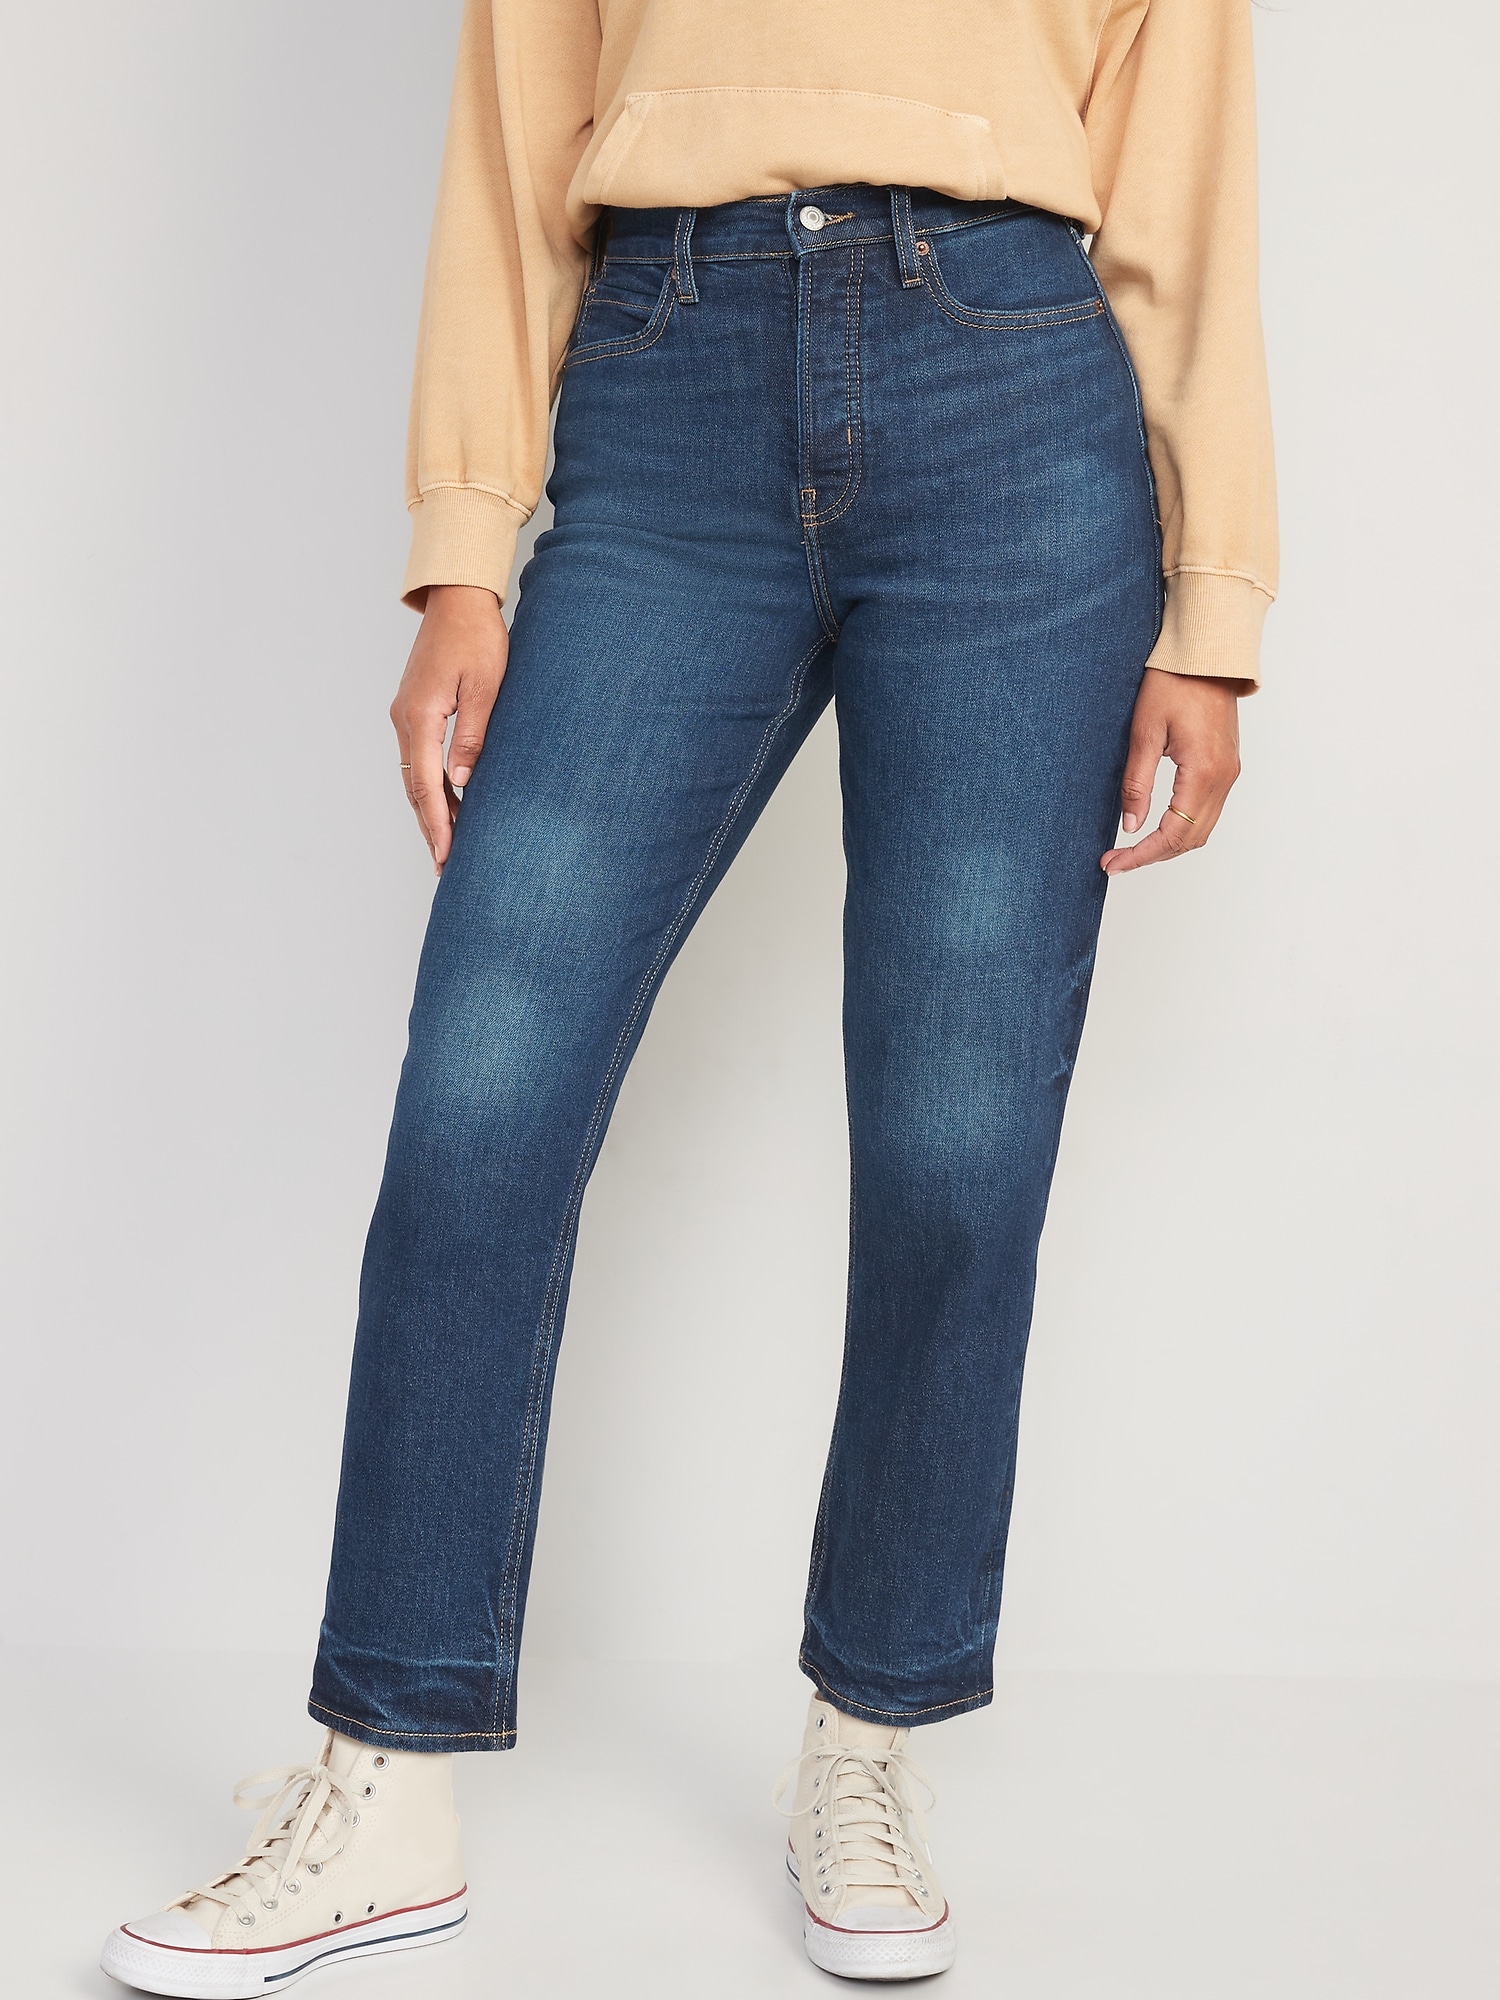 Extra Long Jeans for Women | Old Navy